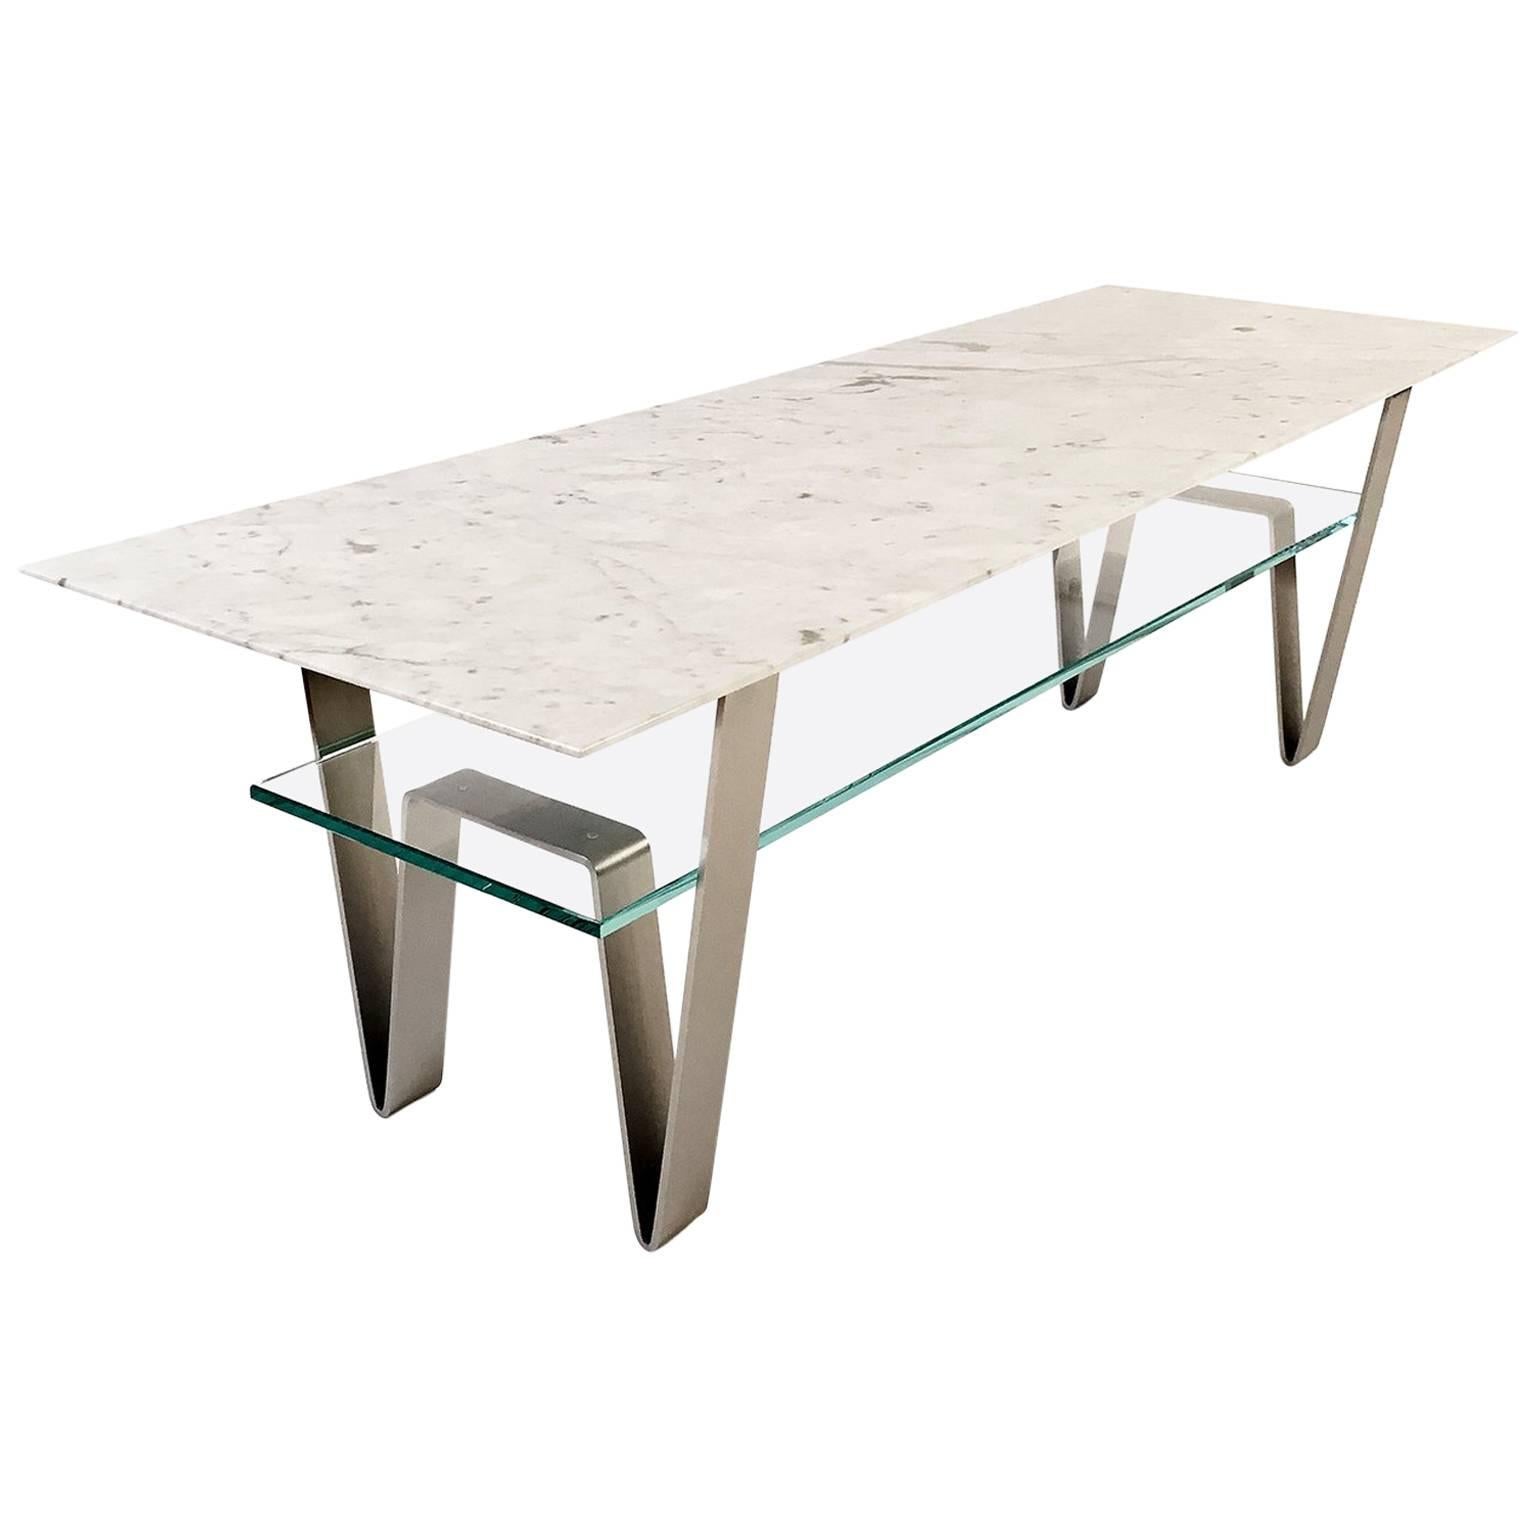 Zaza Table, Contemporary Carrara Marble, Stainless Steel and Glass Coffee Table For Sale